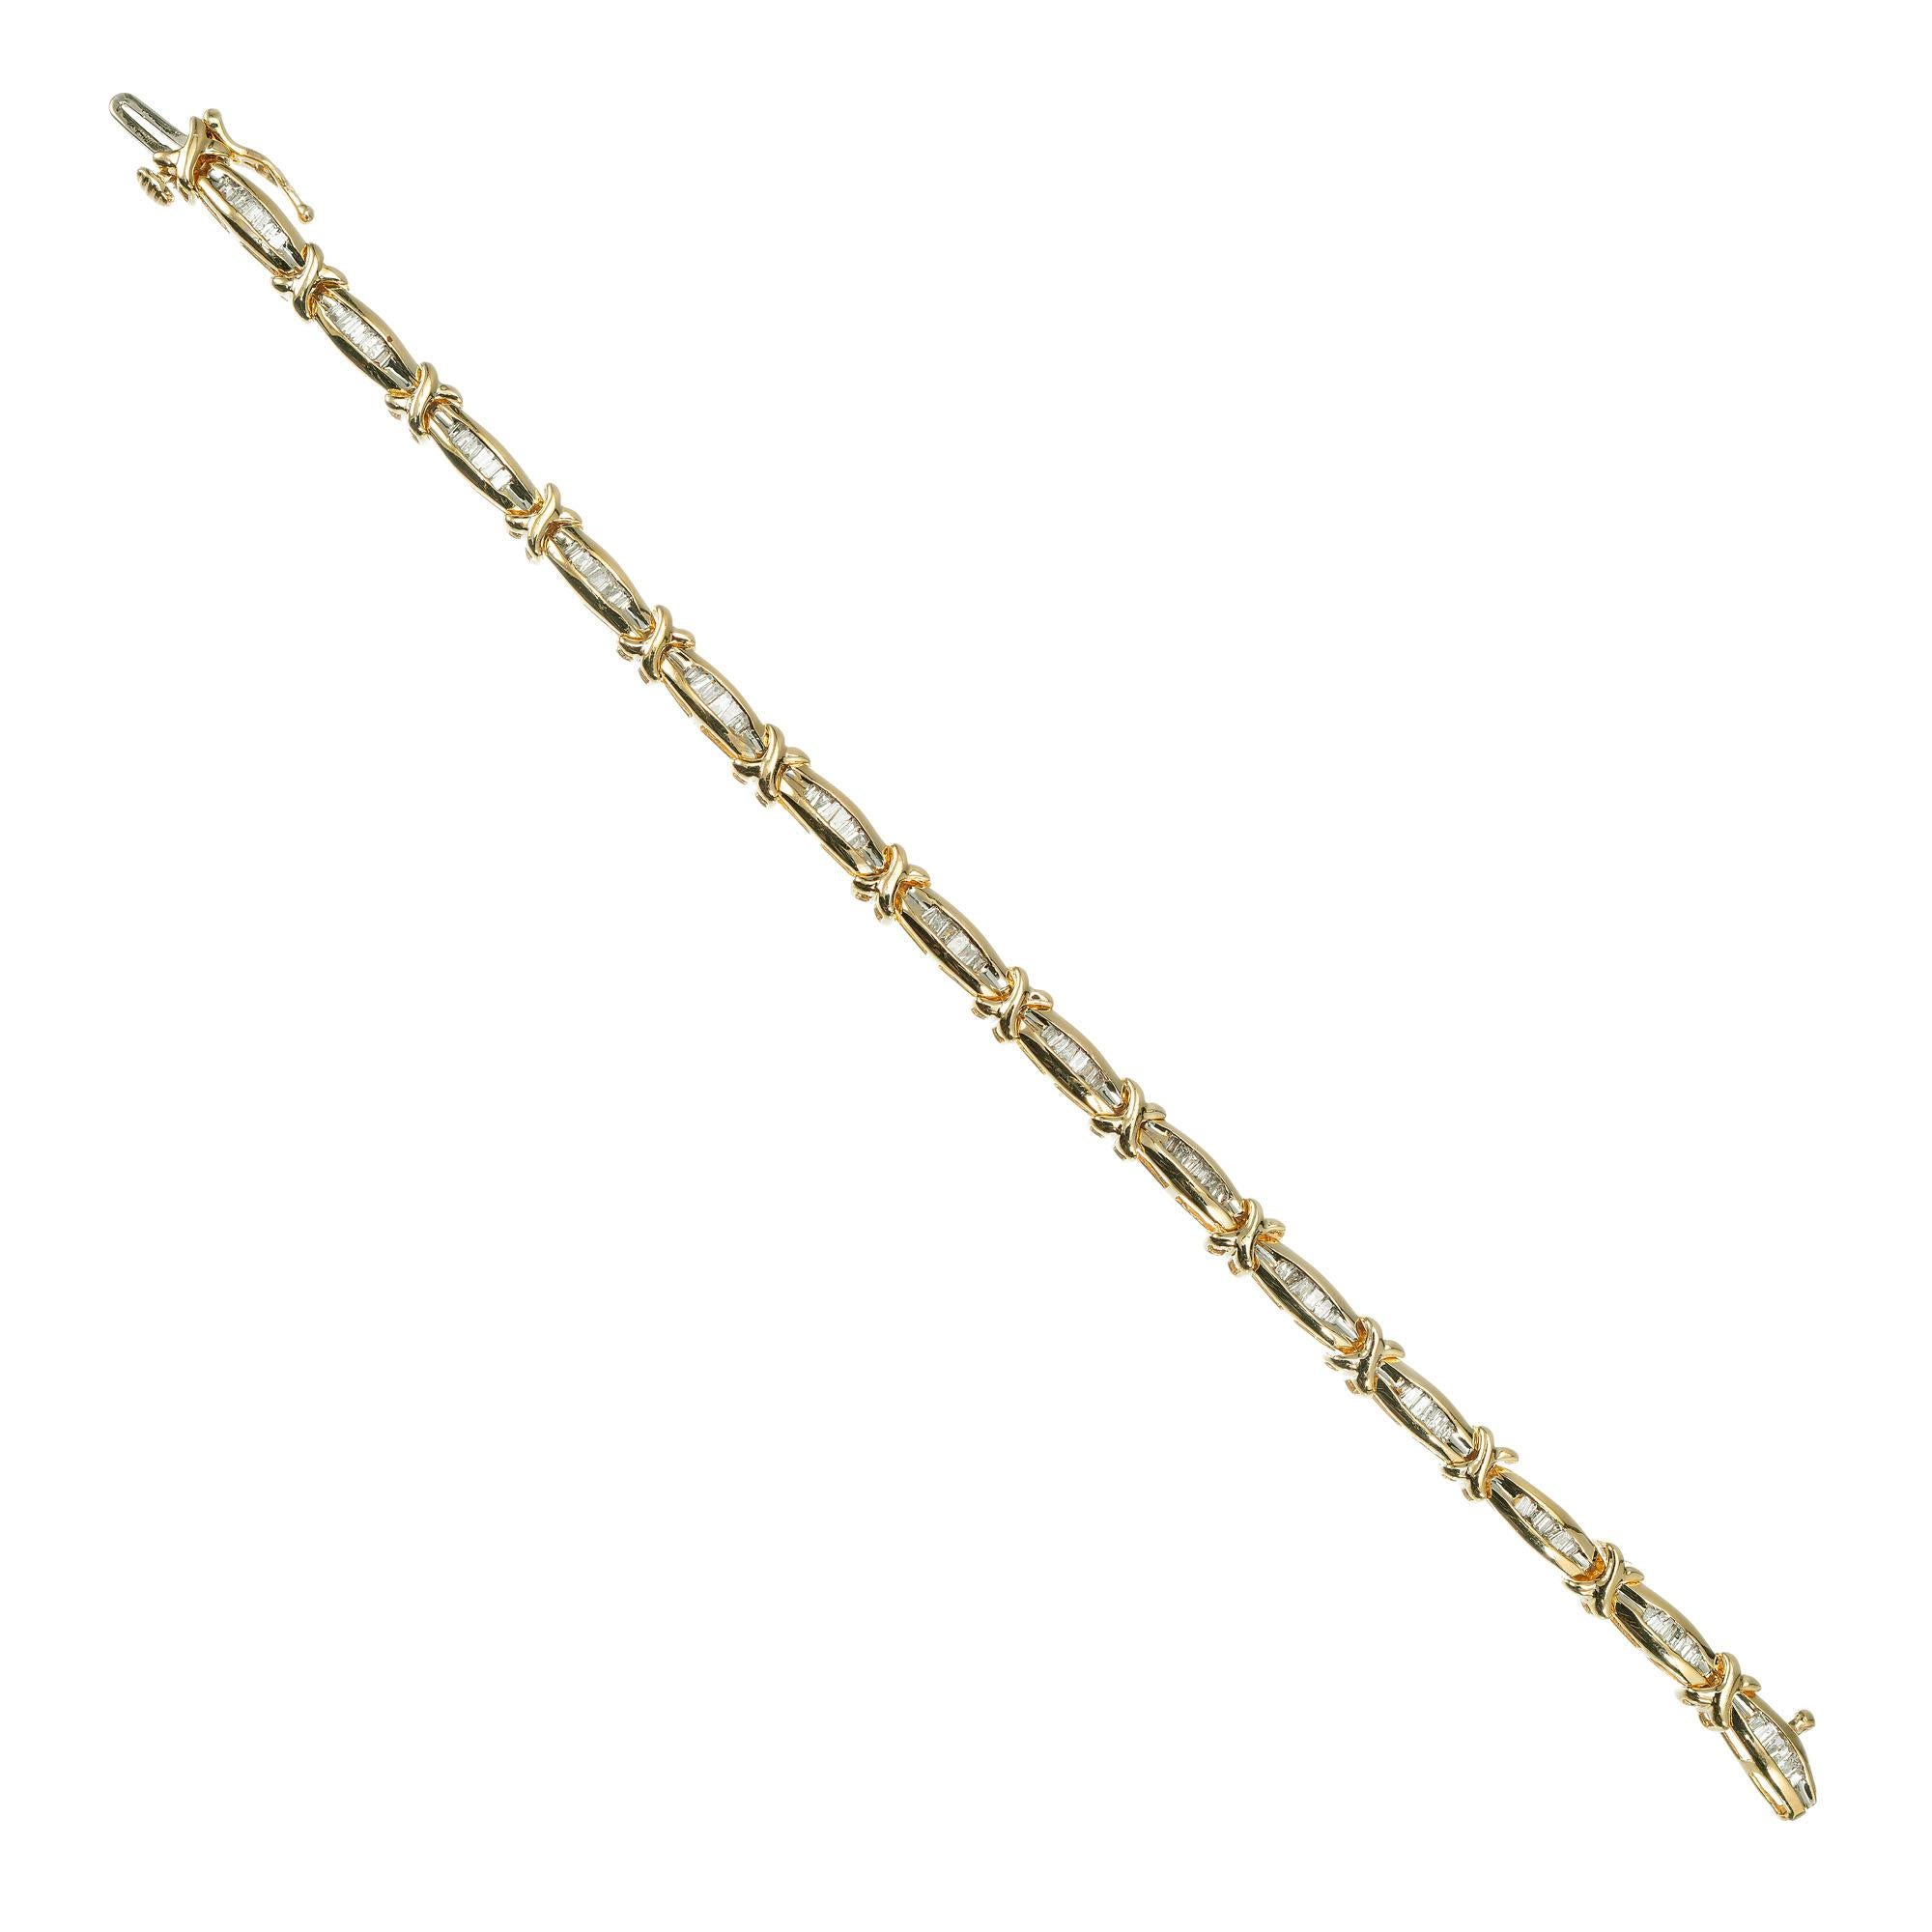 Diamond hinged link 14k yellow gold bracelet with 98 channel set baguette diamonds. 6.75 inches in length.

98 baguette cut diamonds approx. total weight 2.00cts, I - J, SI
14k Yellow Gold
Stamped: 14k
11.1 grams
Height: 4.2mm
Width: 4.8mm
Length: 6